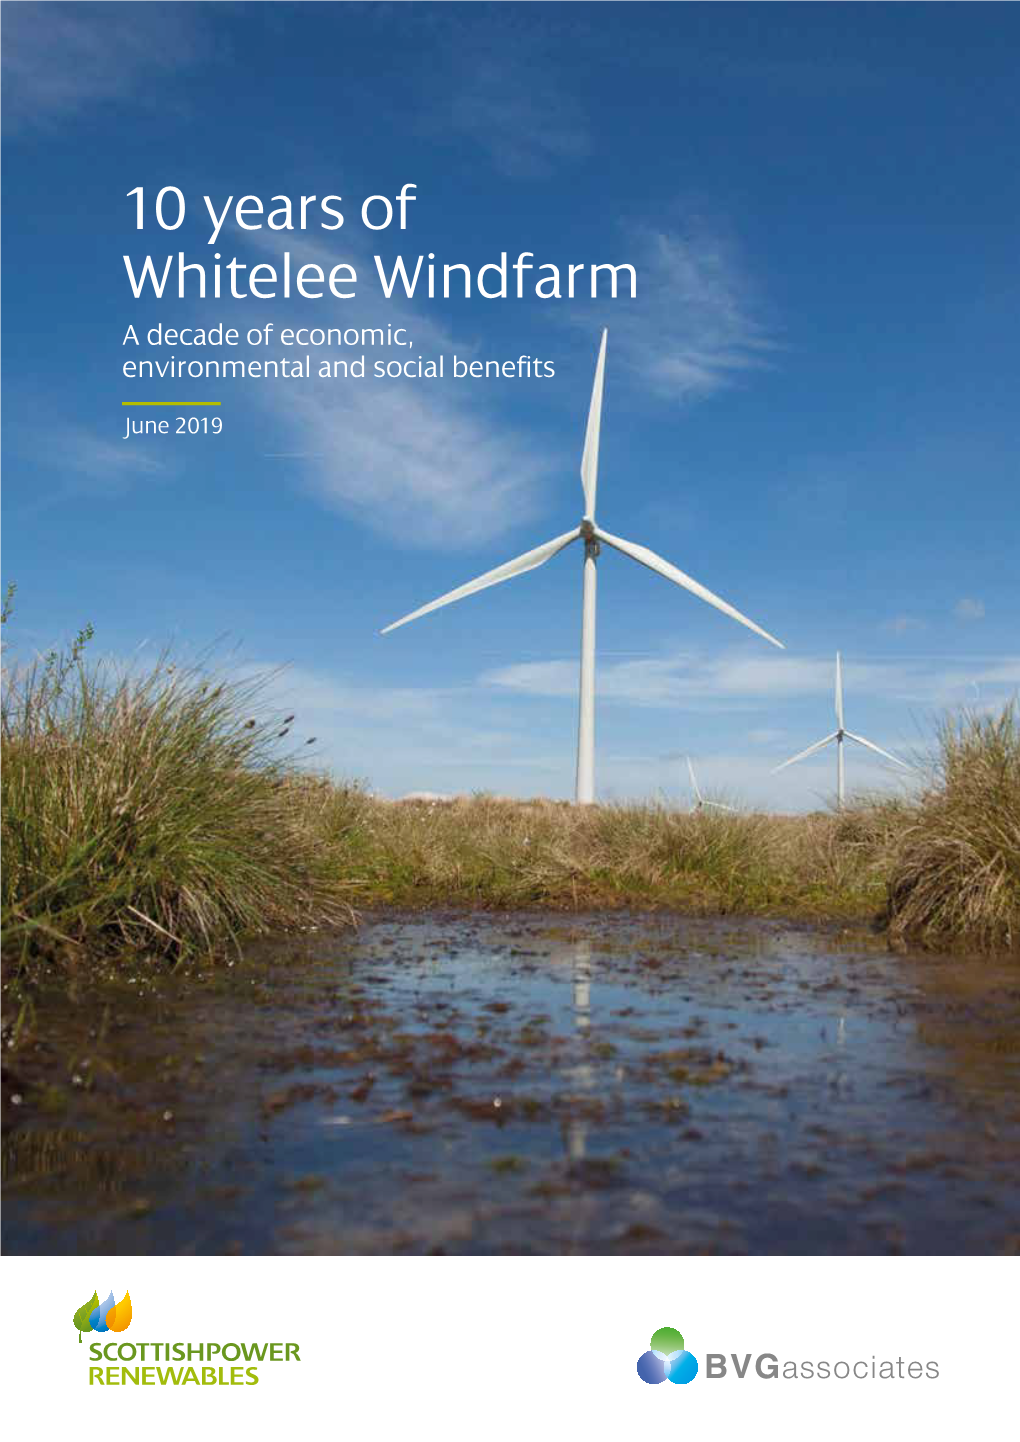 10 Years of Whitelee Windfarm a Decade of Economic, Environmental and Social Benefits